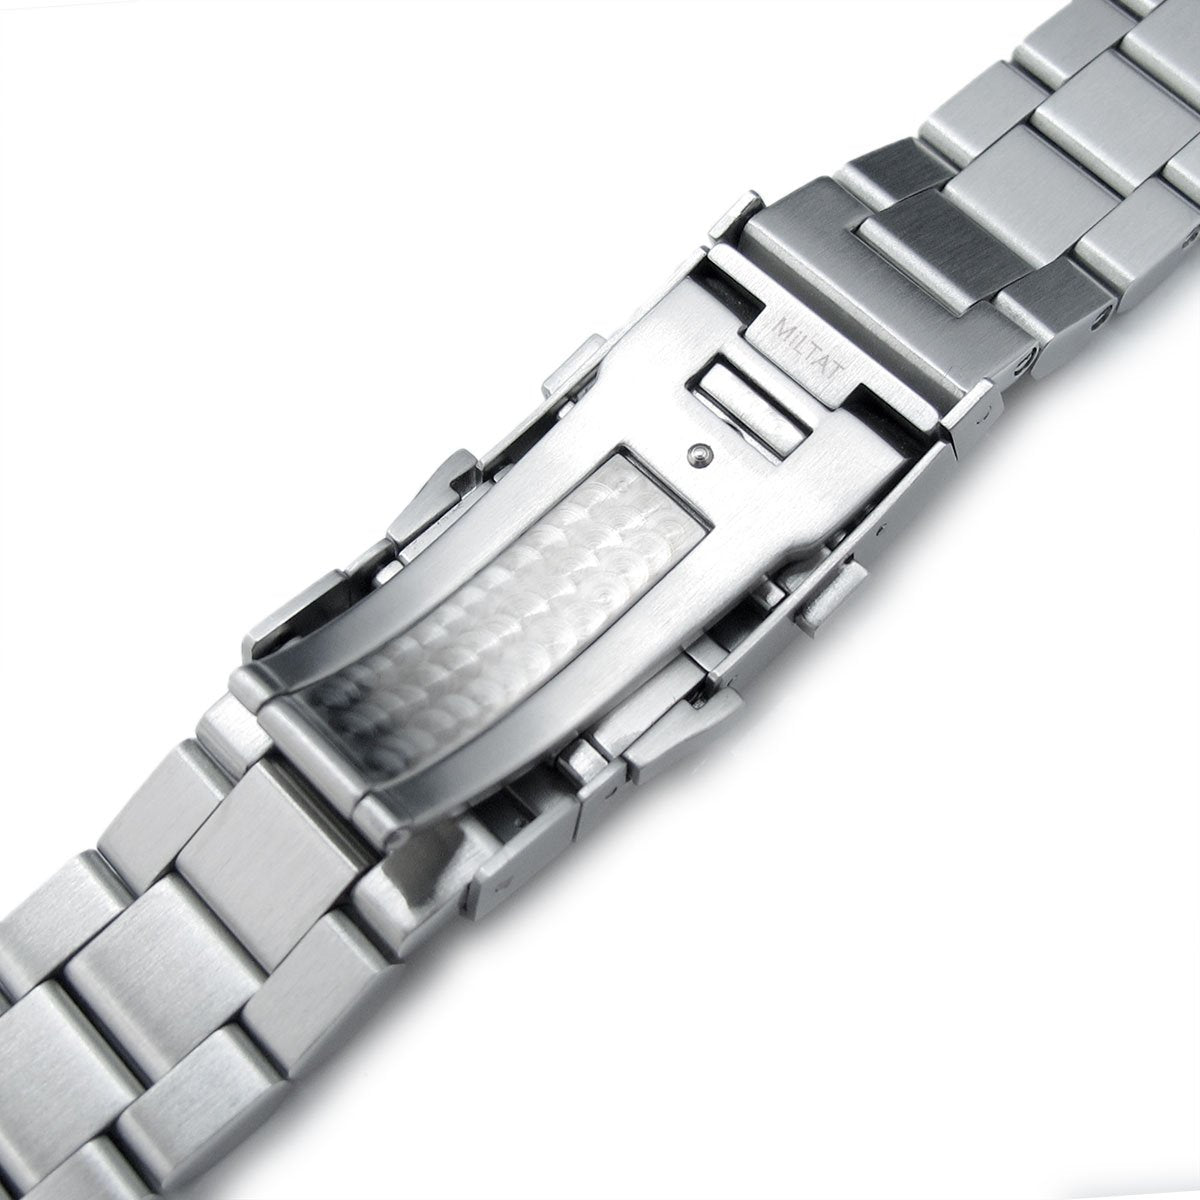 22mm Hexad 316L Stainless Steel Watch Band for Seiko Samurai SRPB51 Wetsuit Ratchet Buckle Strapcode Watch Bands